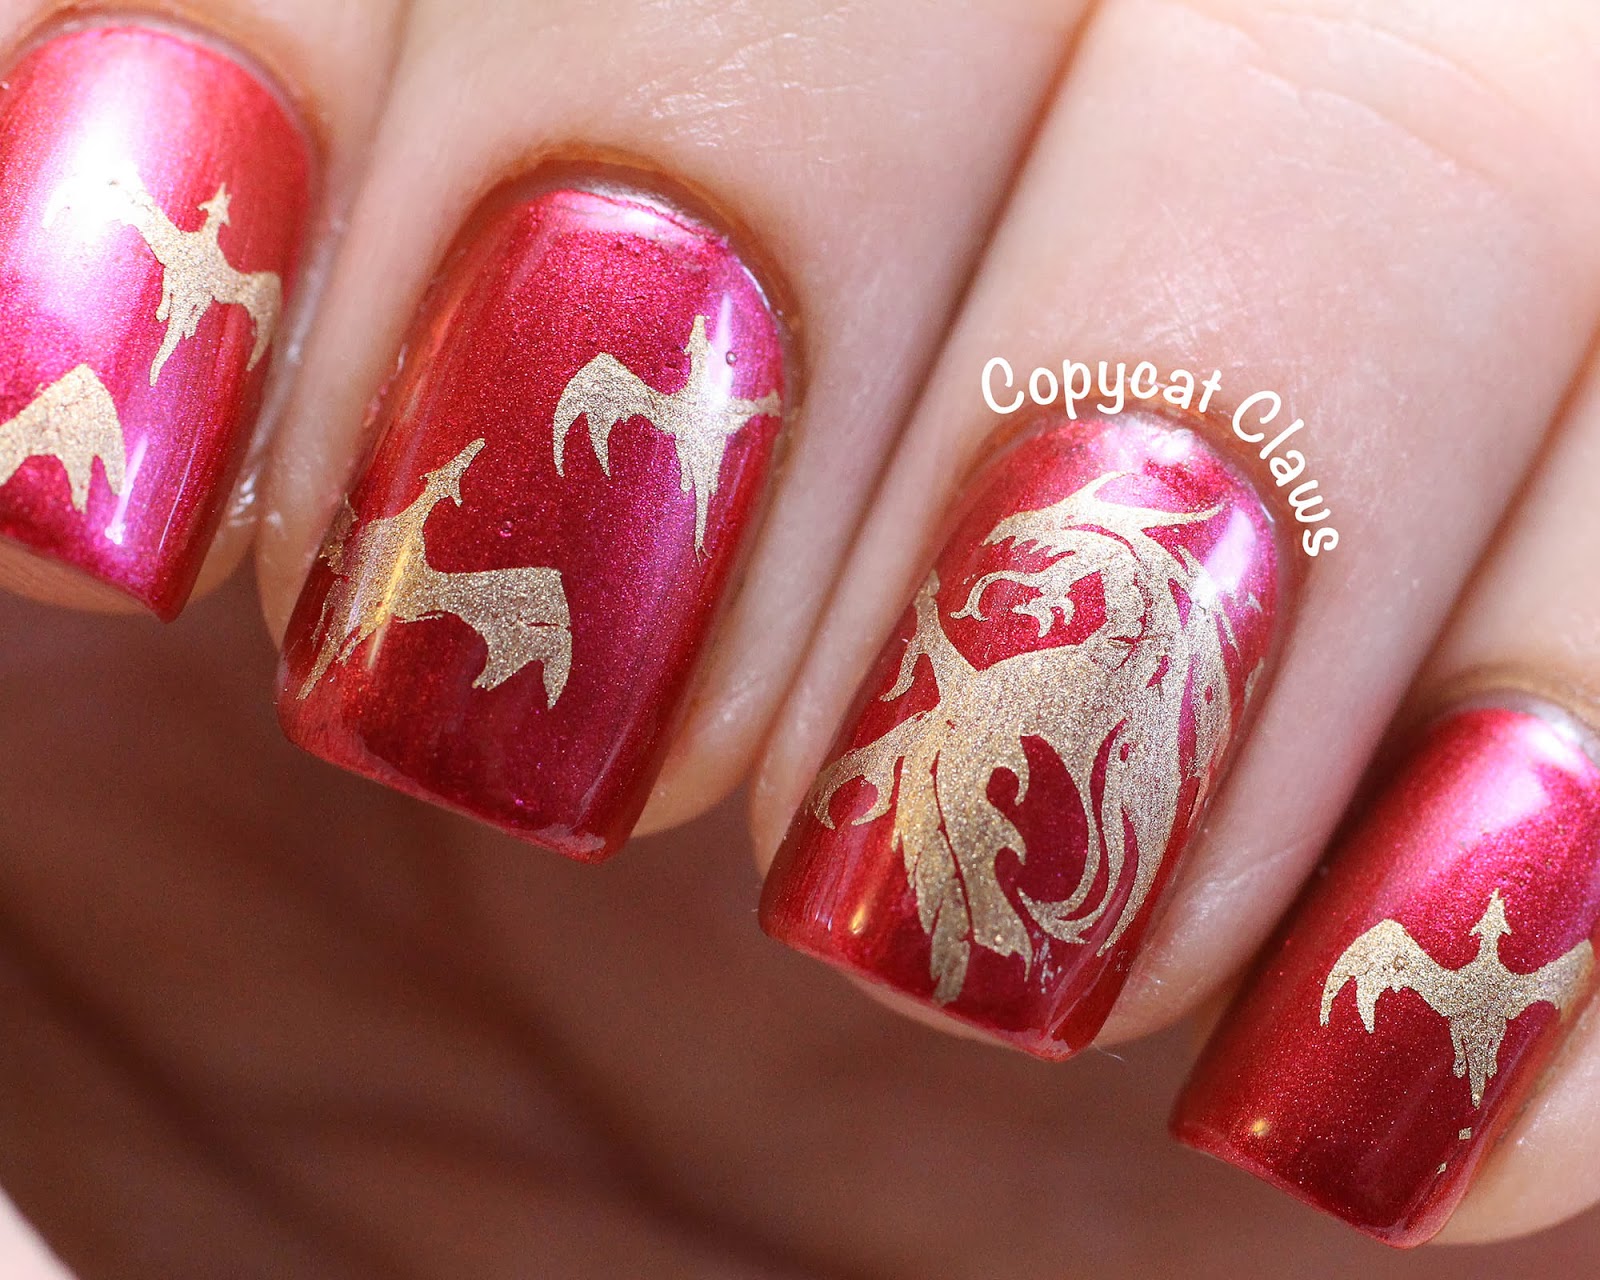 10. Dragon Nail Art with Ombre Effect - wide 2